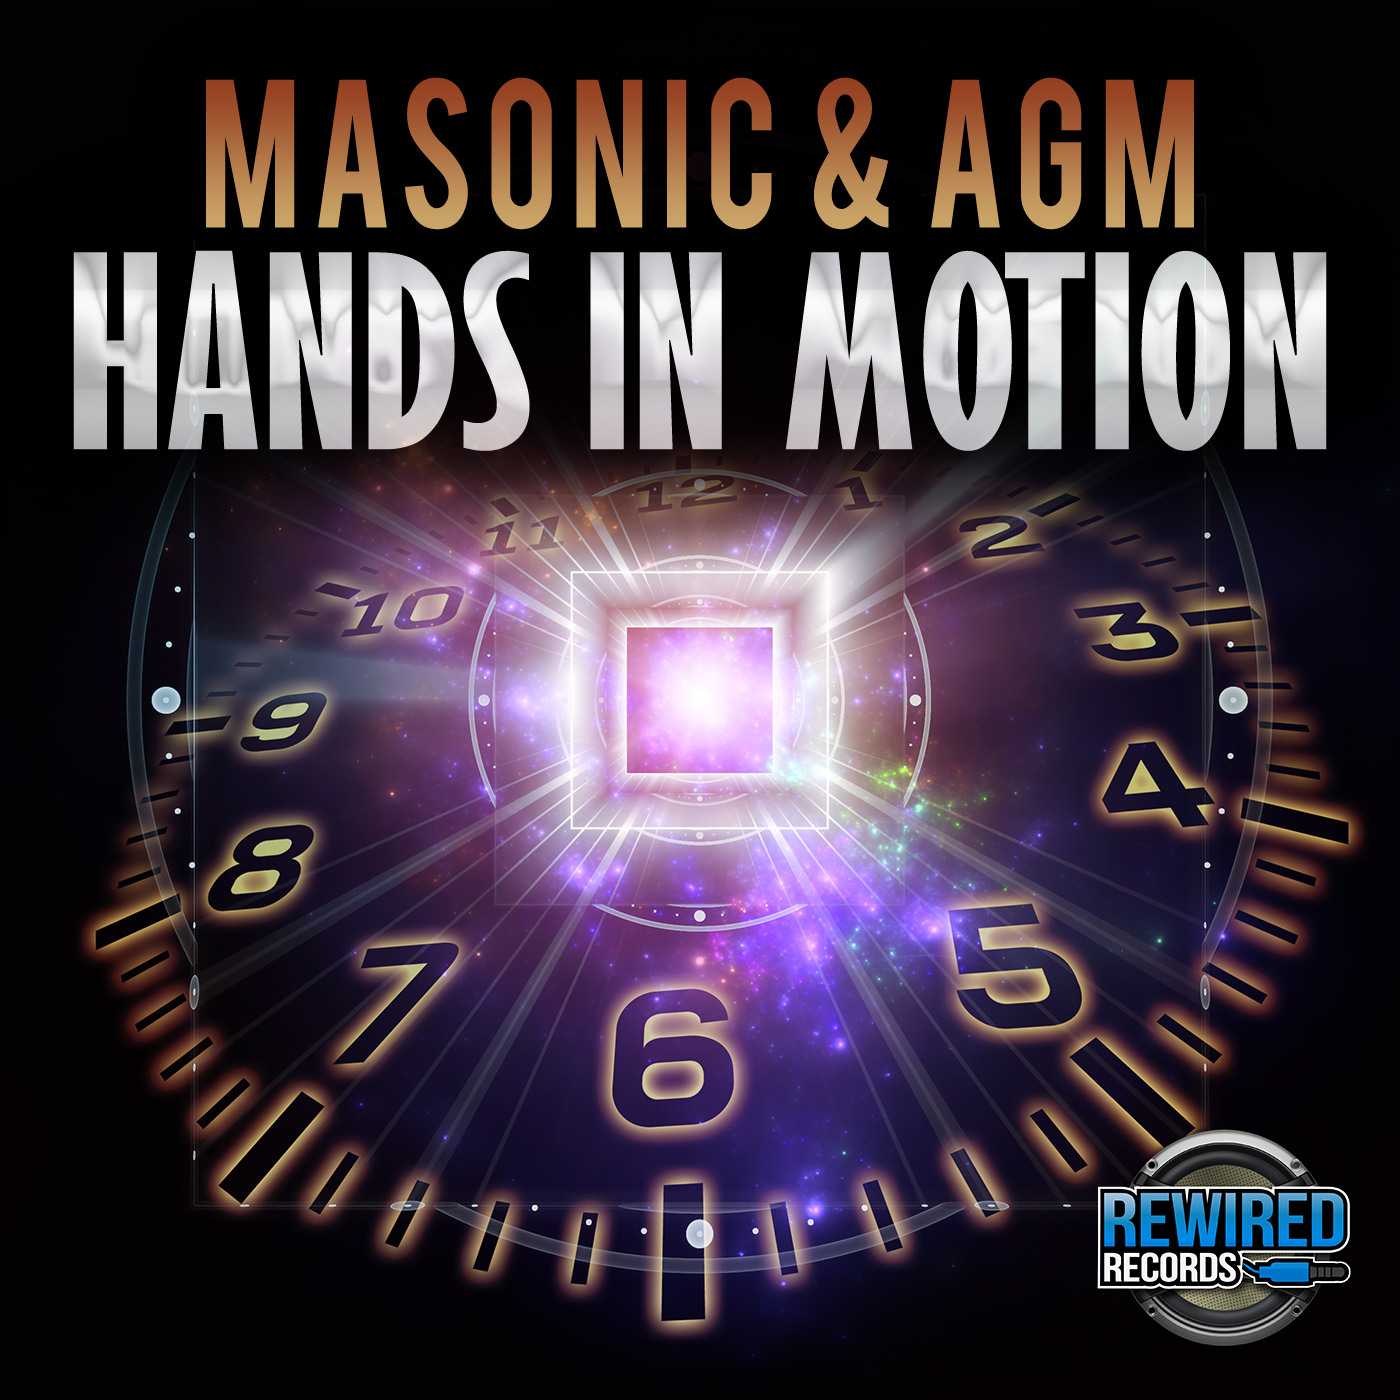 Masonic & AGM - Hands In Motion - Rewired Records